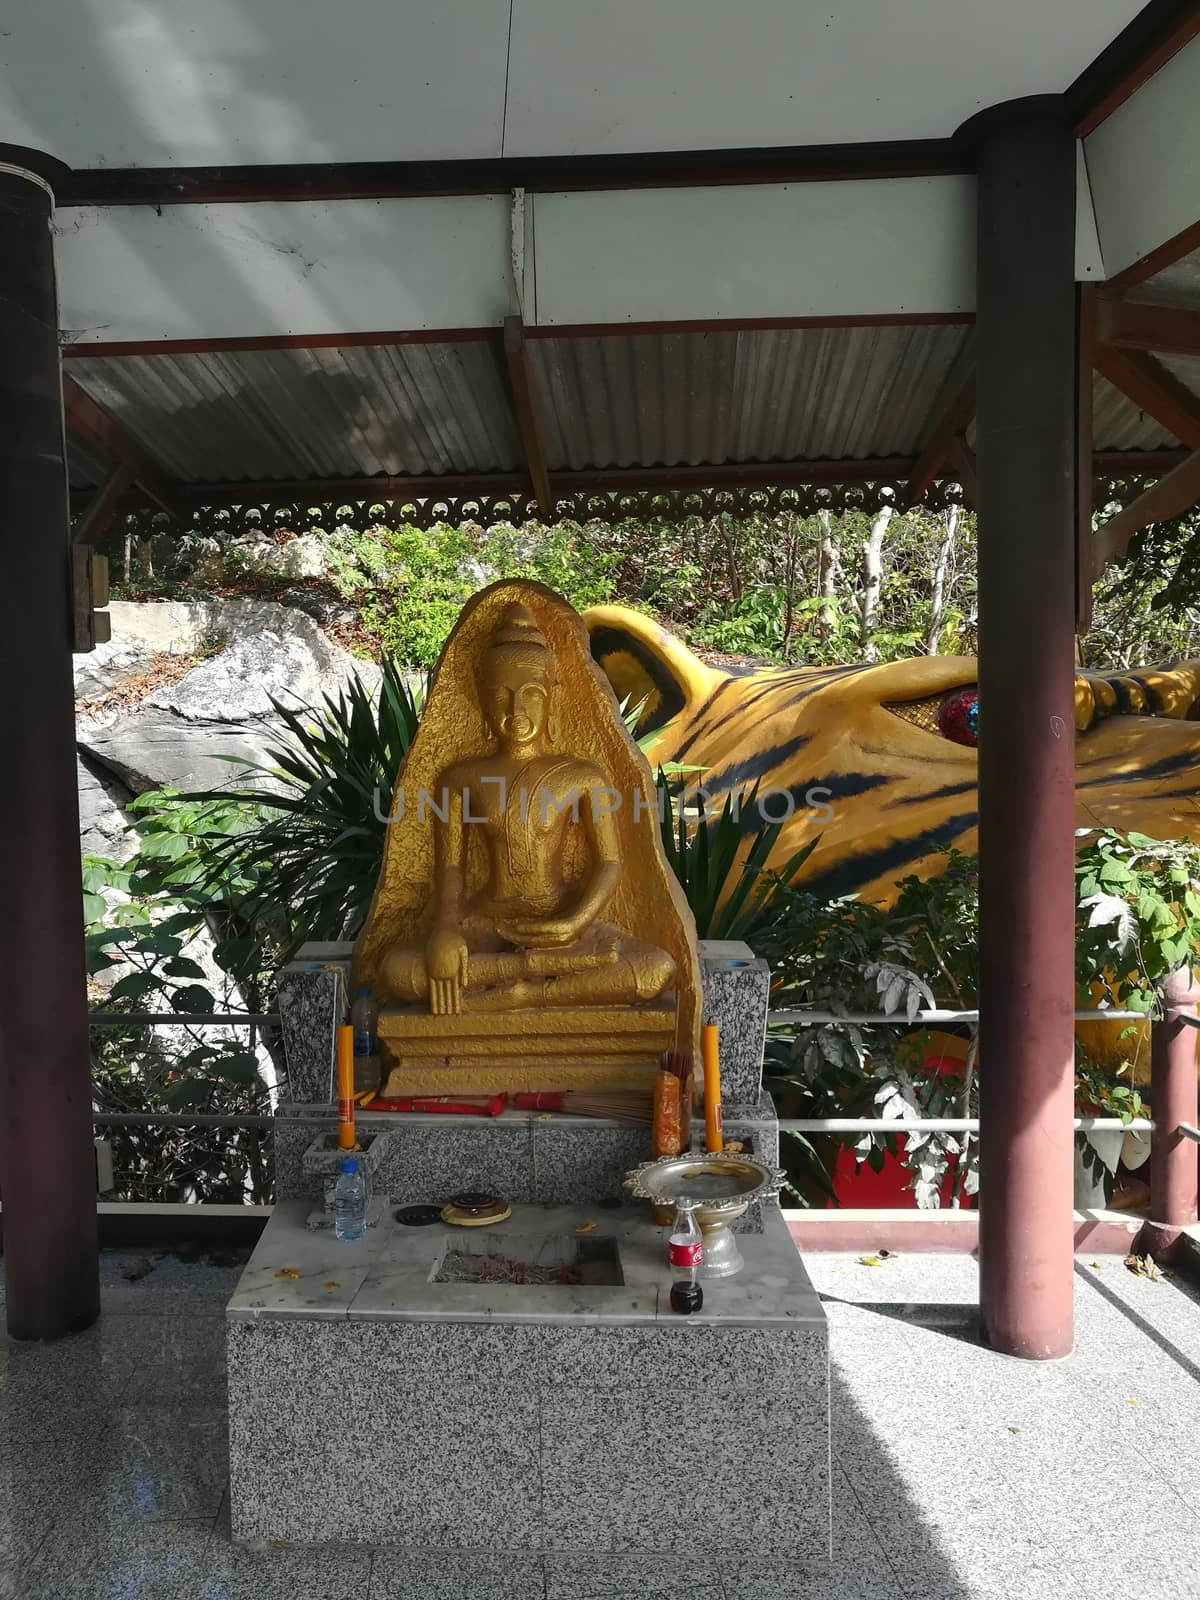 Worship Buddhist pavilion statue at Temple in Thailand  And his by shatchaya